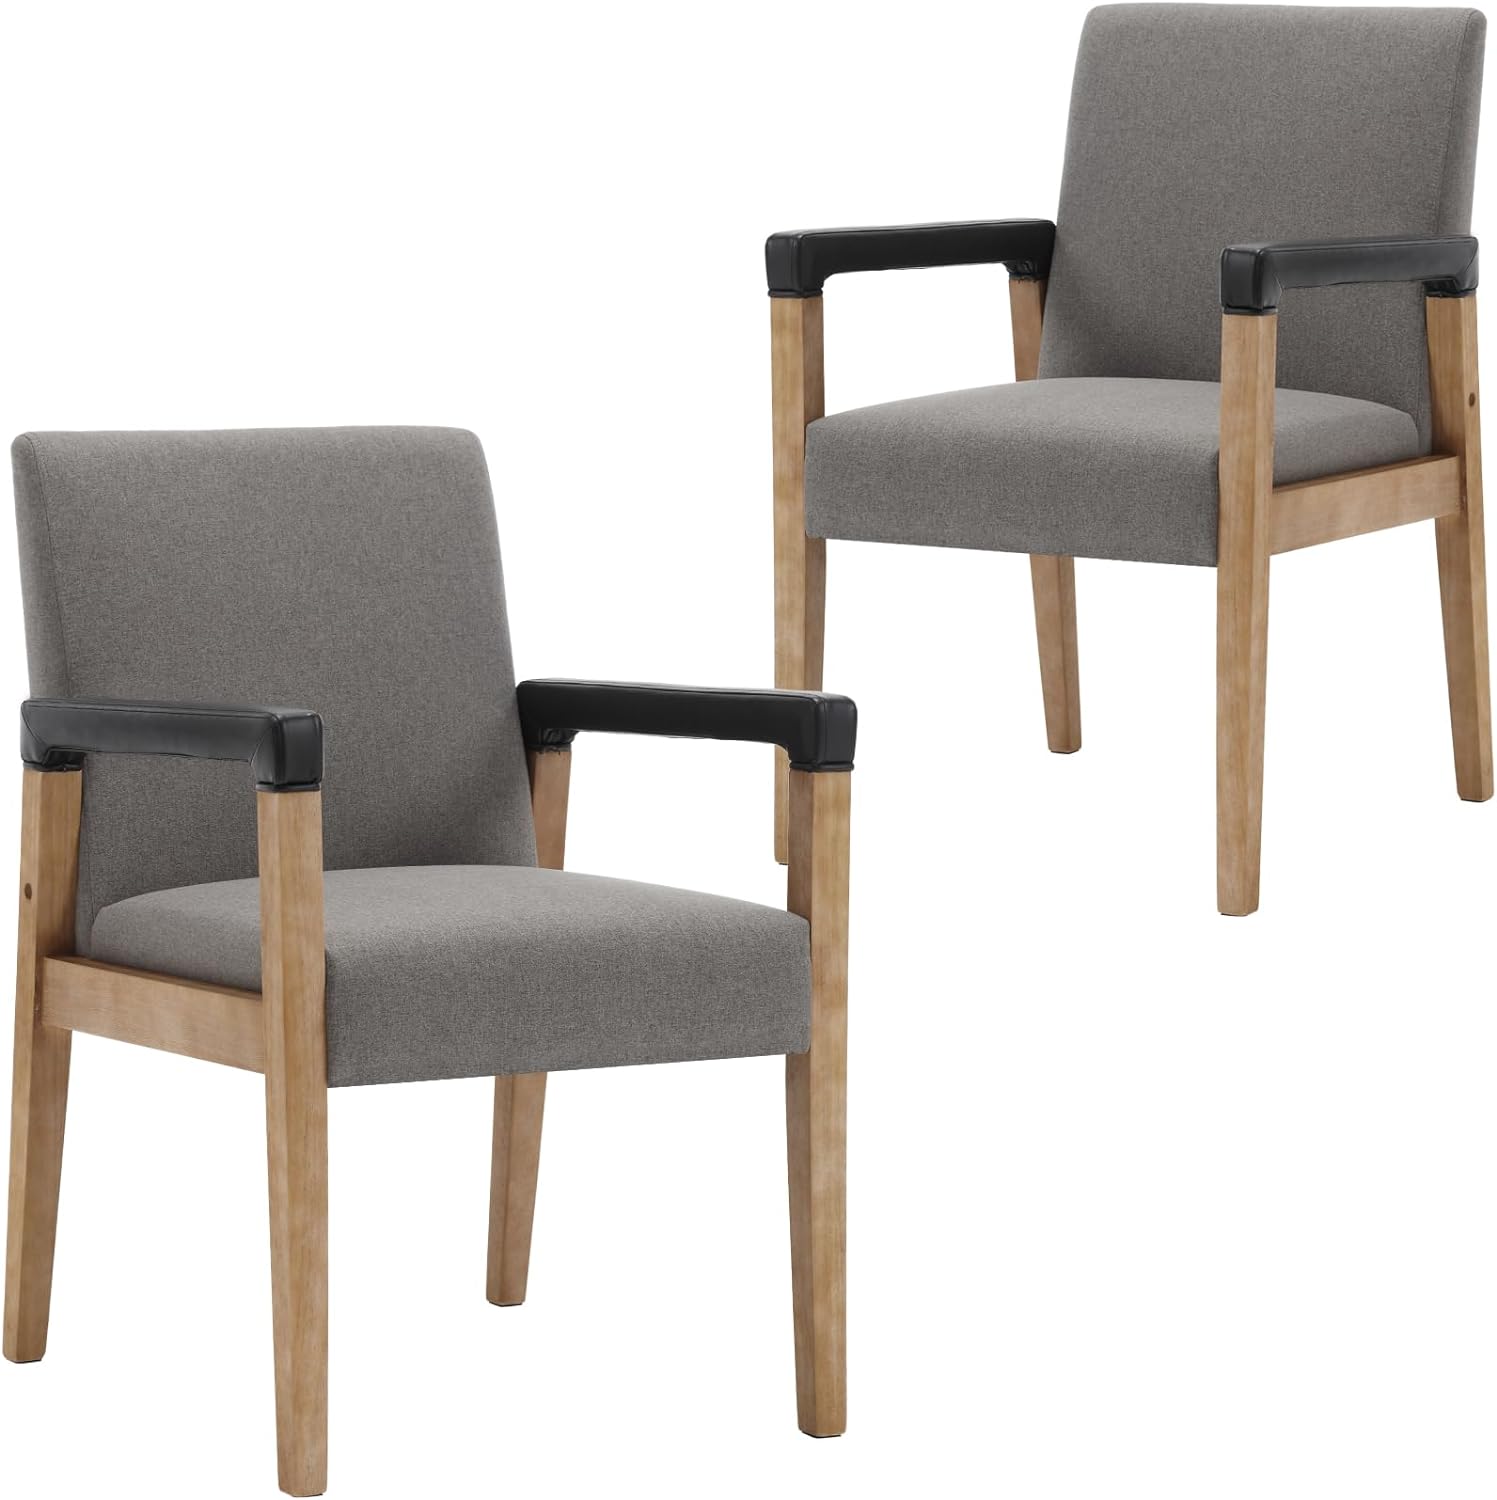 These chairs exceeded my expectations and are beautiful. They are very firm but not uncomfortable in my opinion. I needed a small seating area and these chairs did very nicely . They dont take up much room and are more universal in the way they can be used .